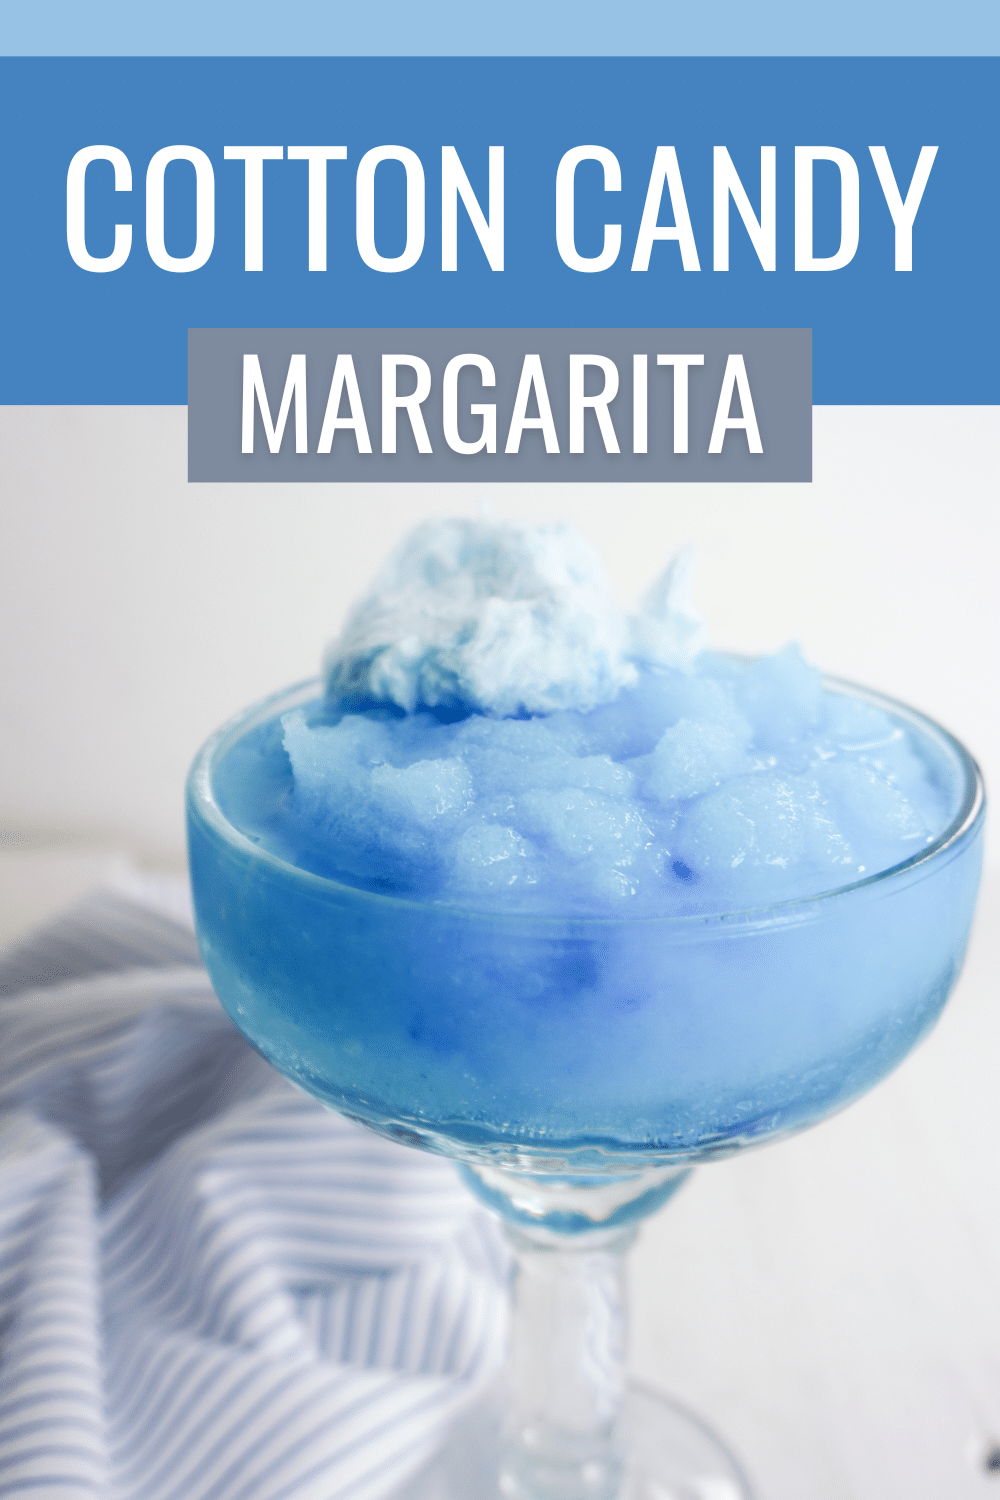 This Cotton Candy Margarita is sure to be a crowd pleaser! With its sweet and delicate flavor, it’s the perfect drink for your get-together. #cottoncandymargarita #cocktail #cottoncandy #margarita #uniquedrink via @wondermomwannab